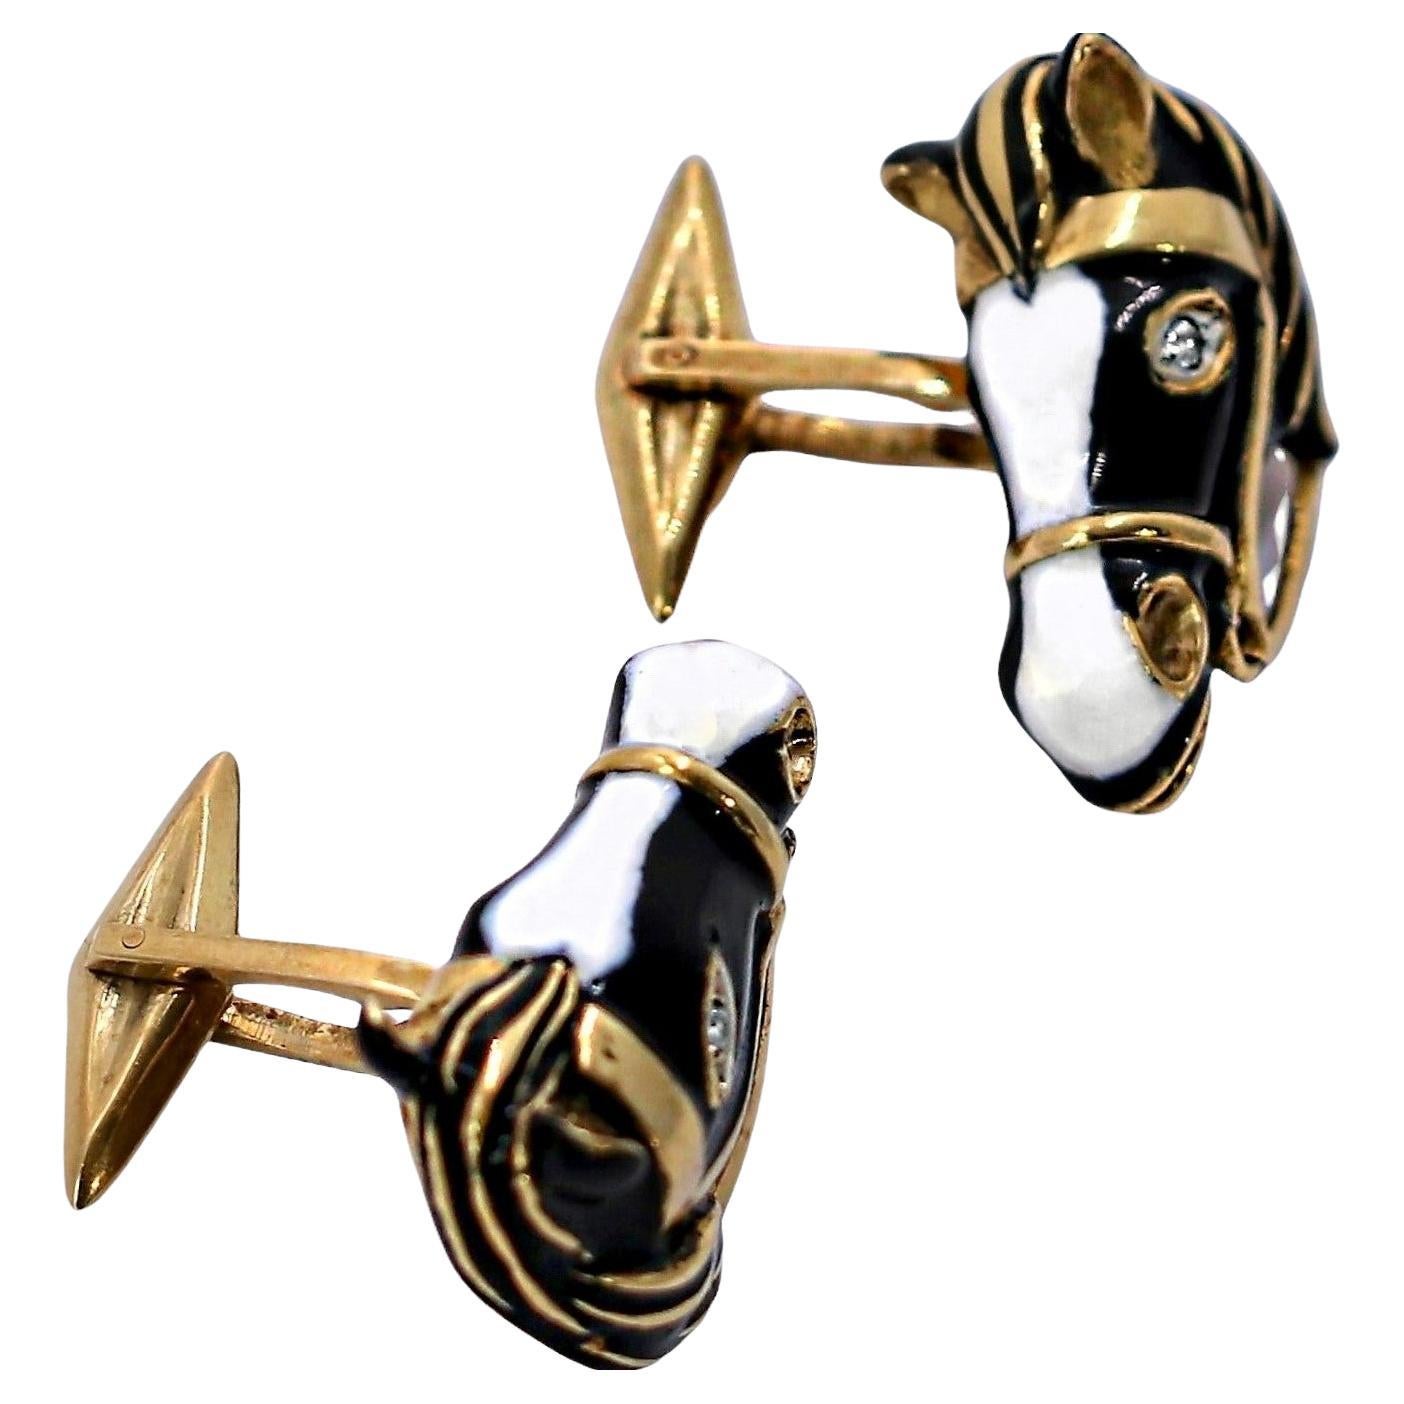 This very well crafted, intricately detailed and life like pair of 18k yellow gold horse head motif cuff links is replete with black and white enamel. Each eye is set with one brilliant cut diamond of overall G/H color and VS1 clarity, and their